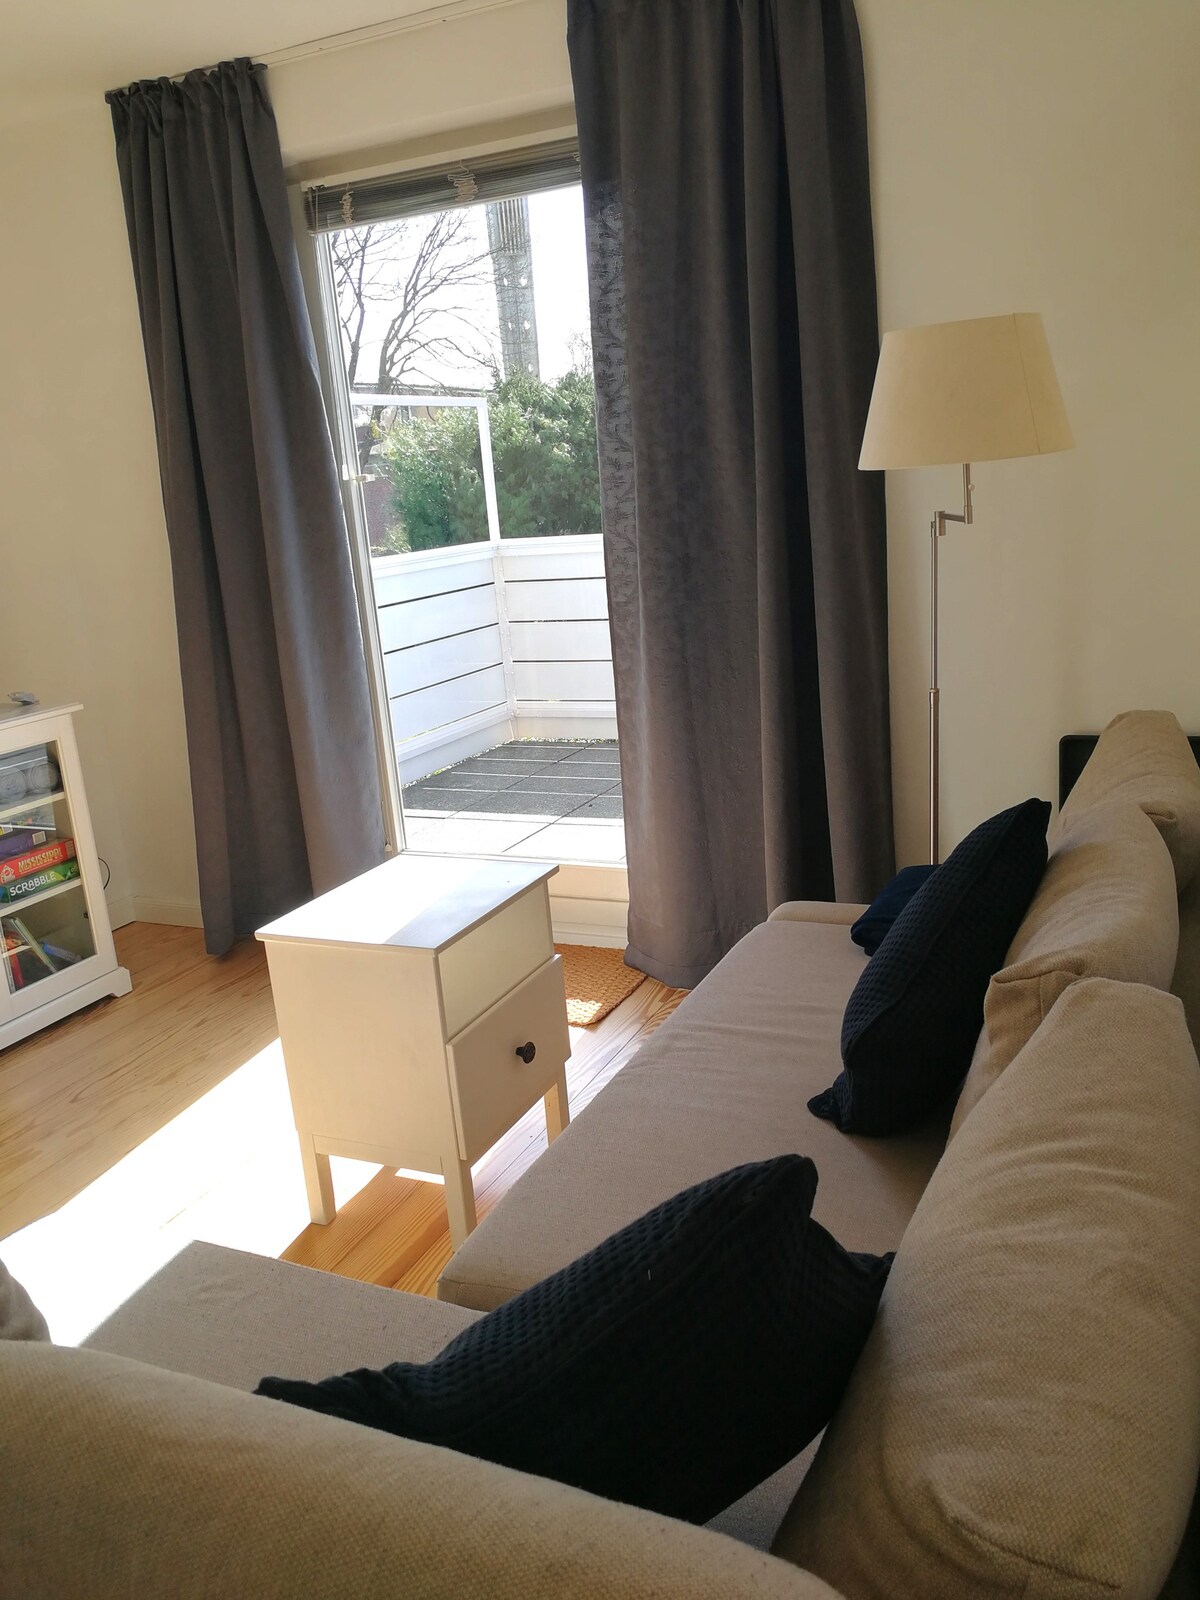 Suite mit Balkon in Rahlstedt